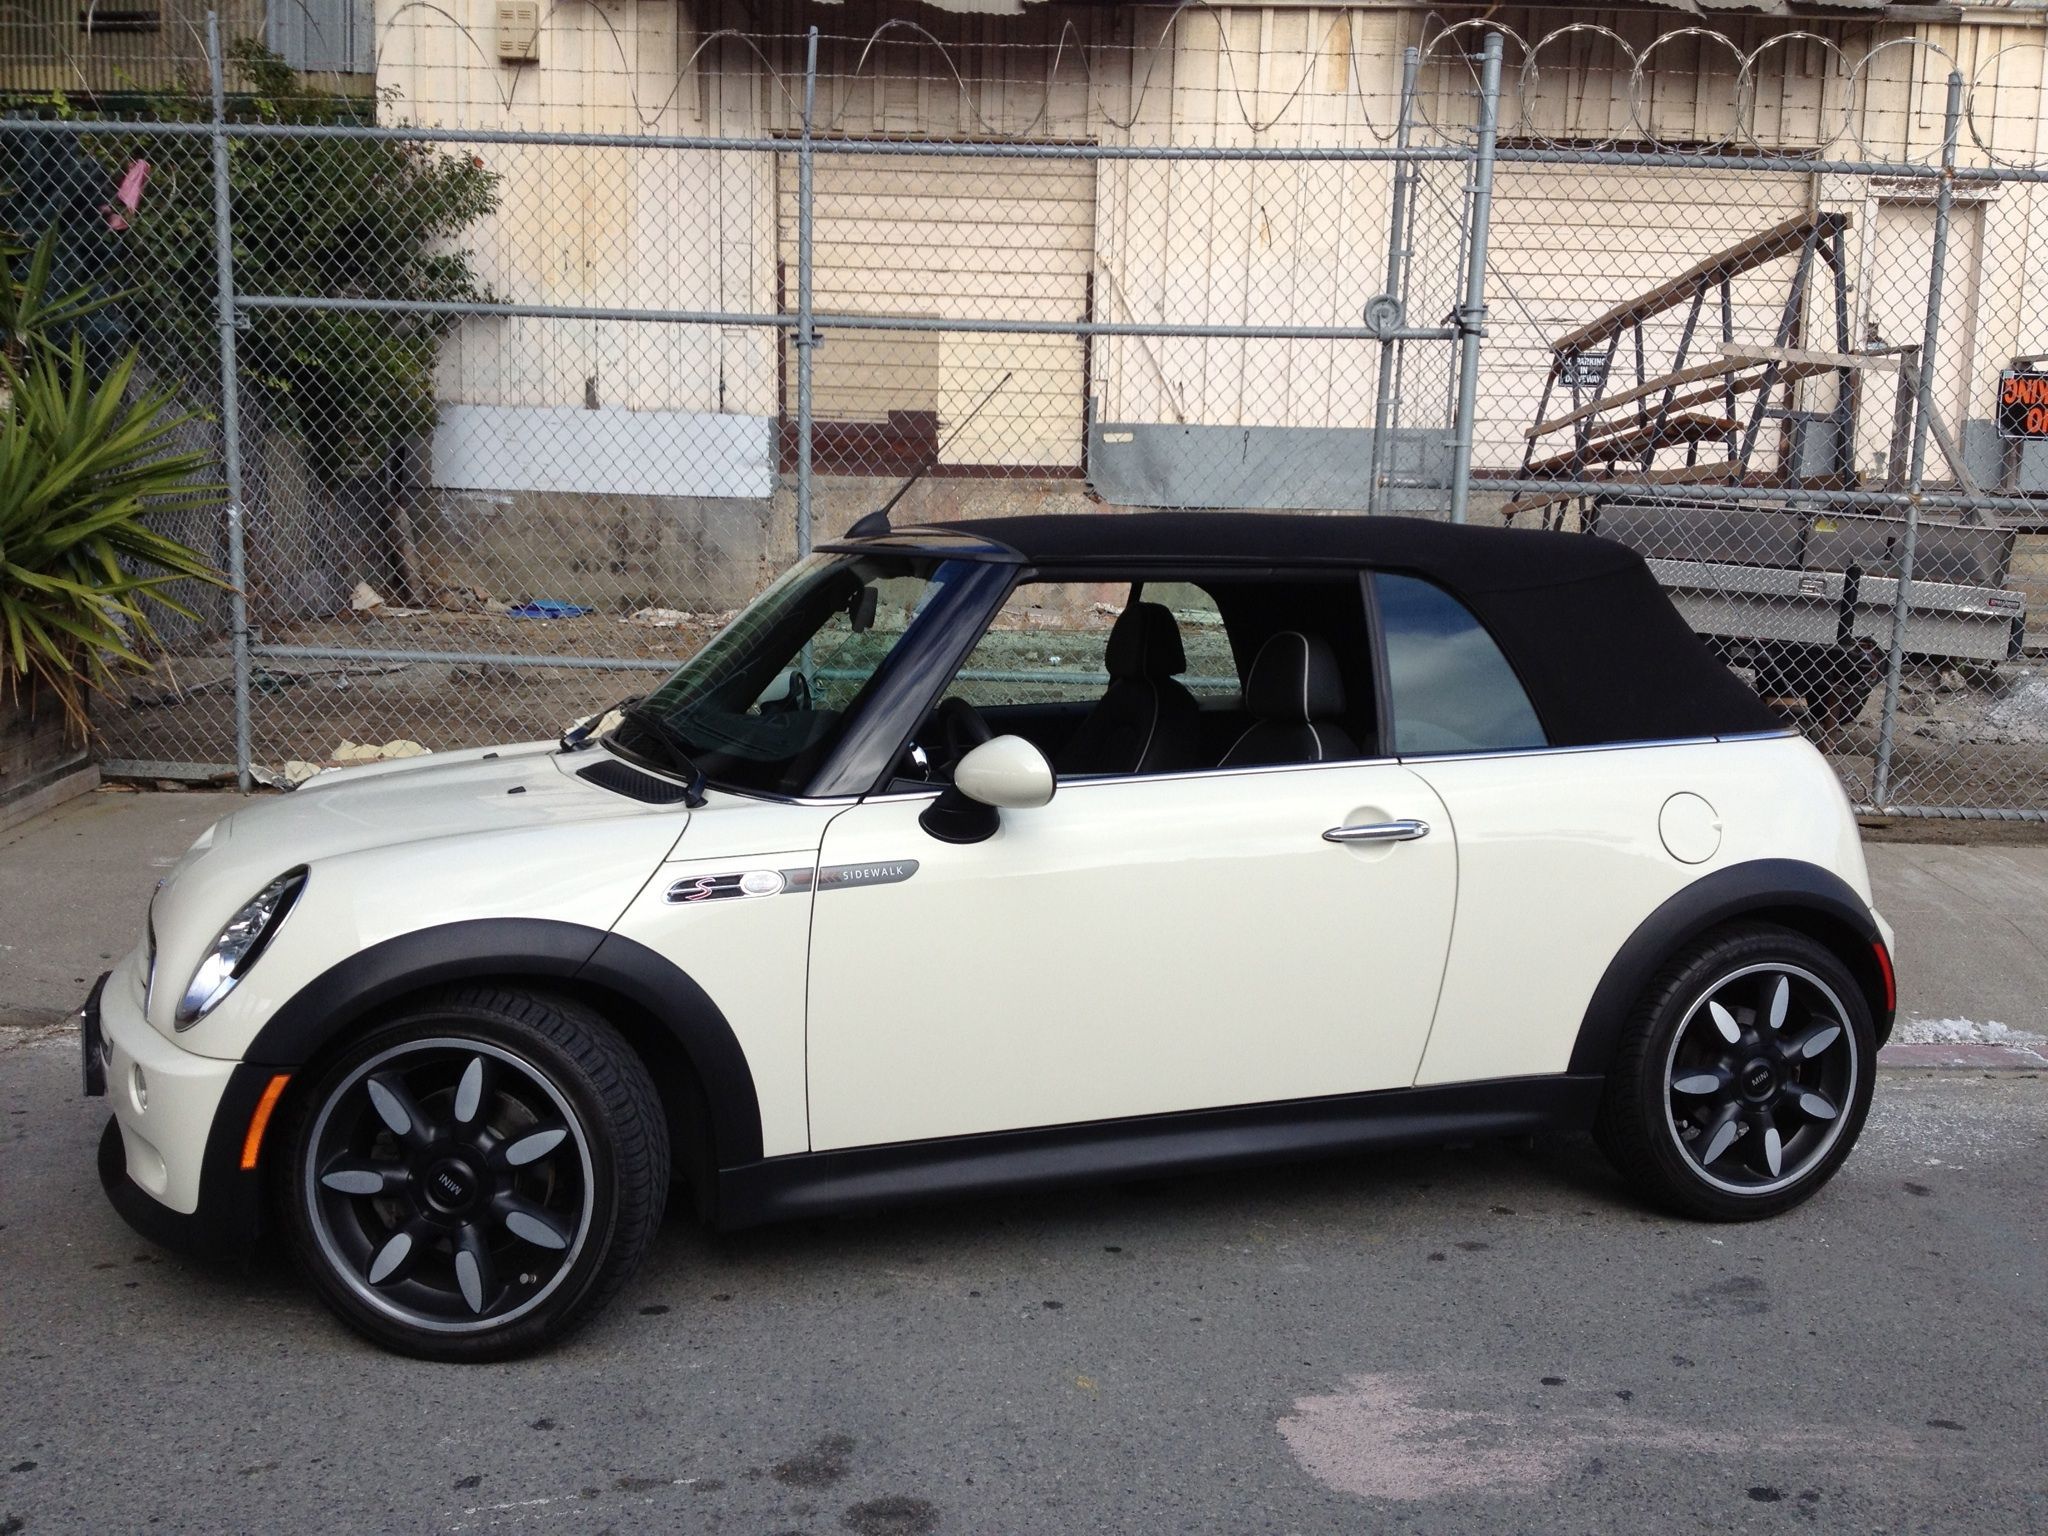 8 Reasons Why The R56 Mini Is Awesome (2 Reasons Why We'd Never Buy One)